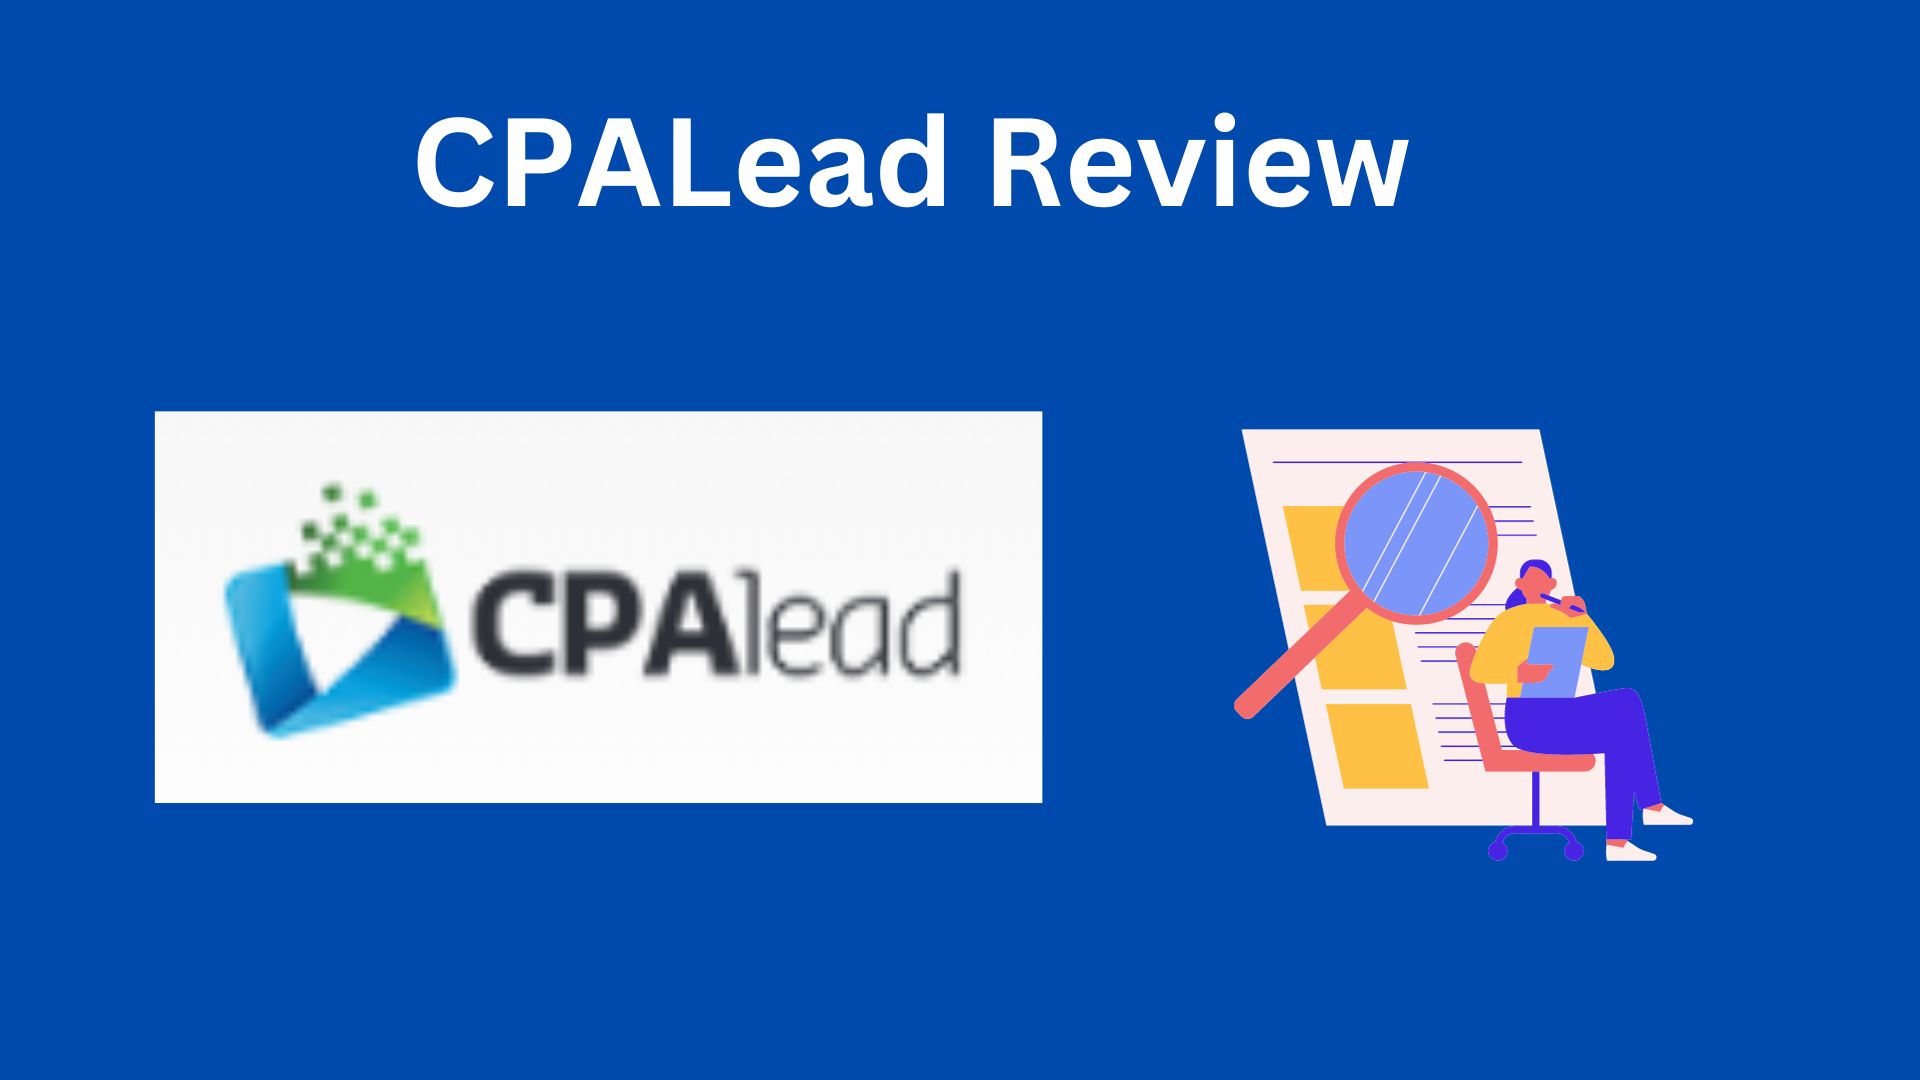 CPALead Review